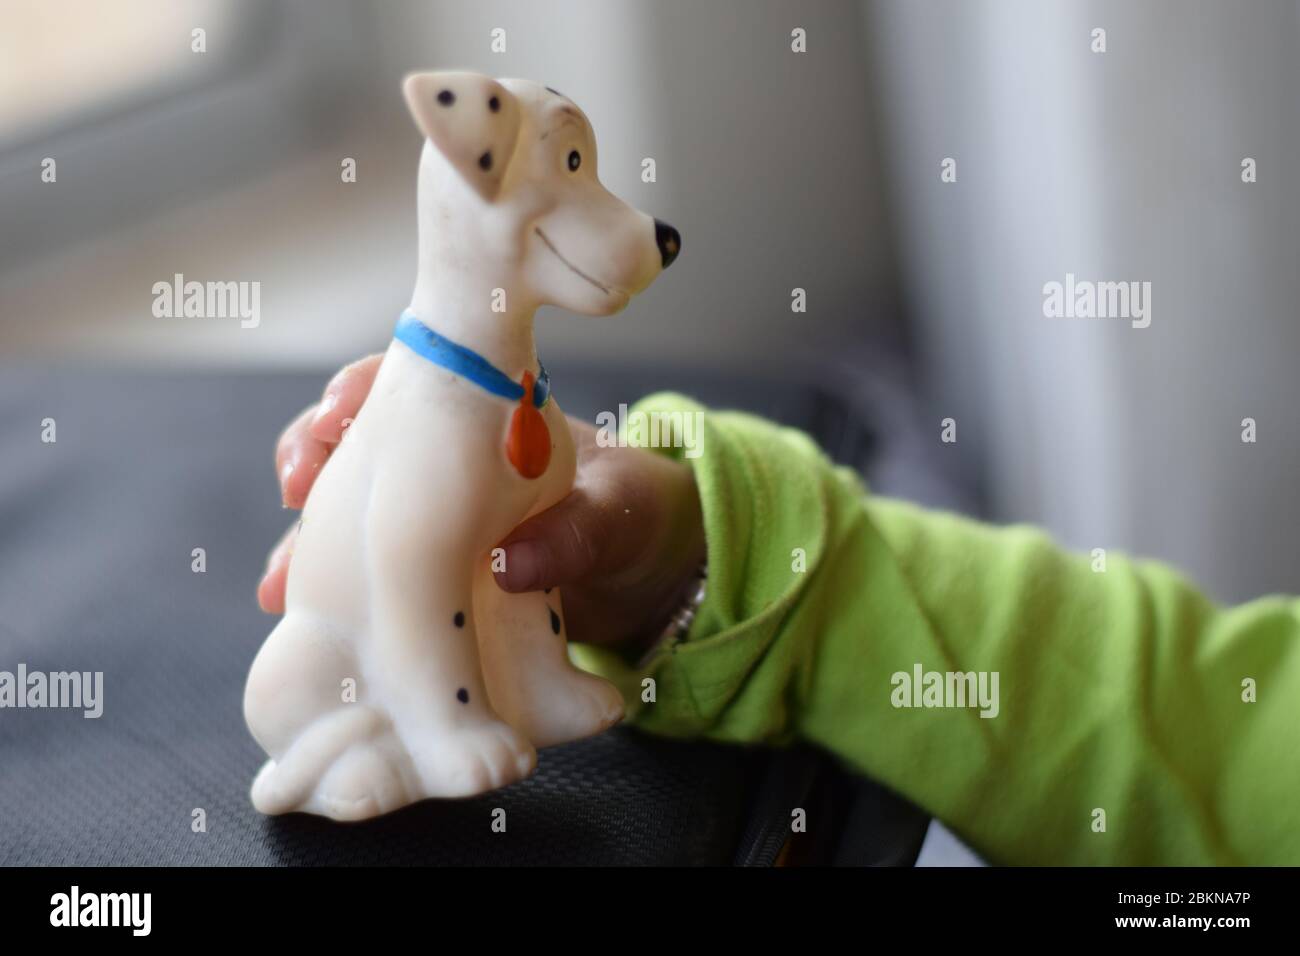 close up shot of a hand holding a dog toy Stock Photo